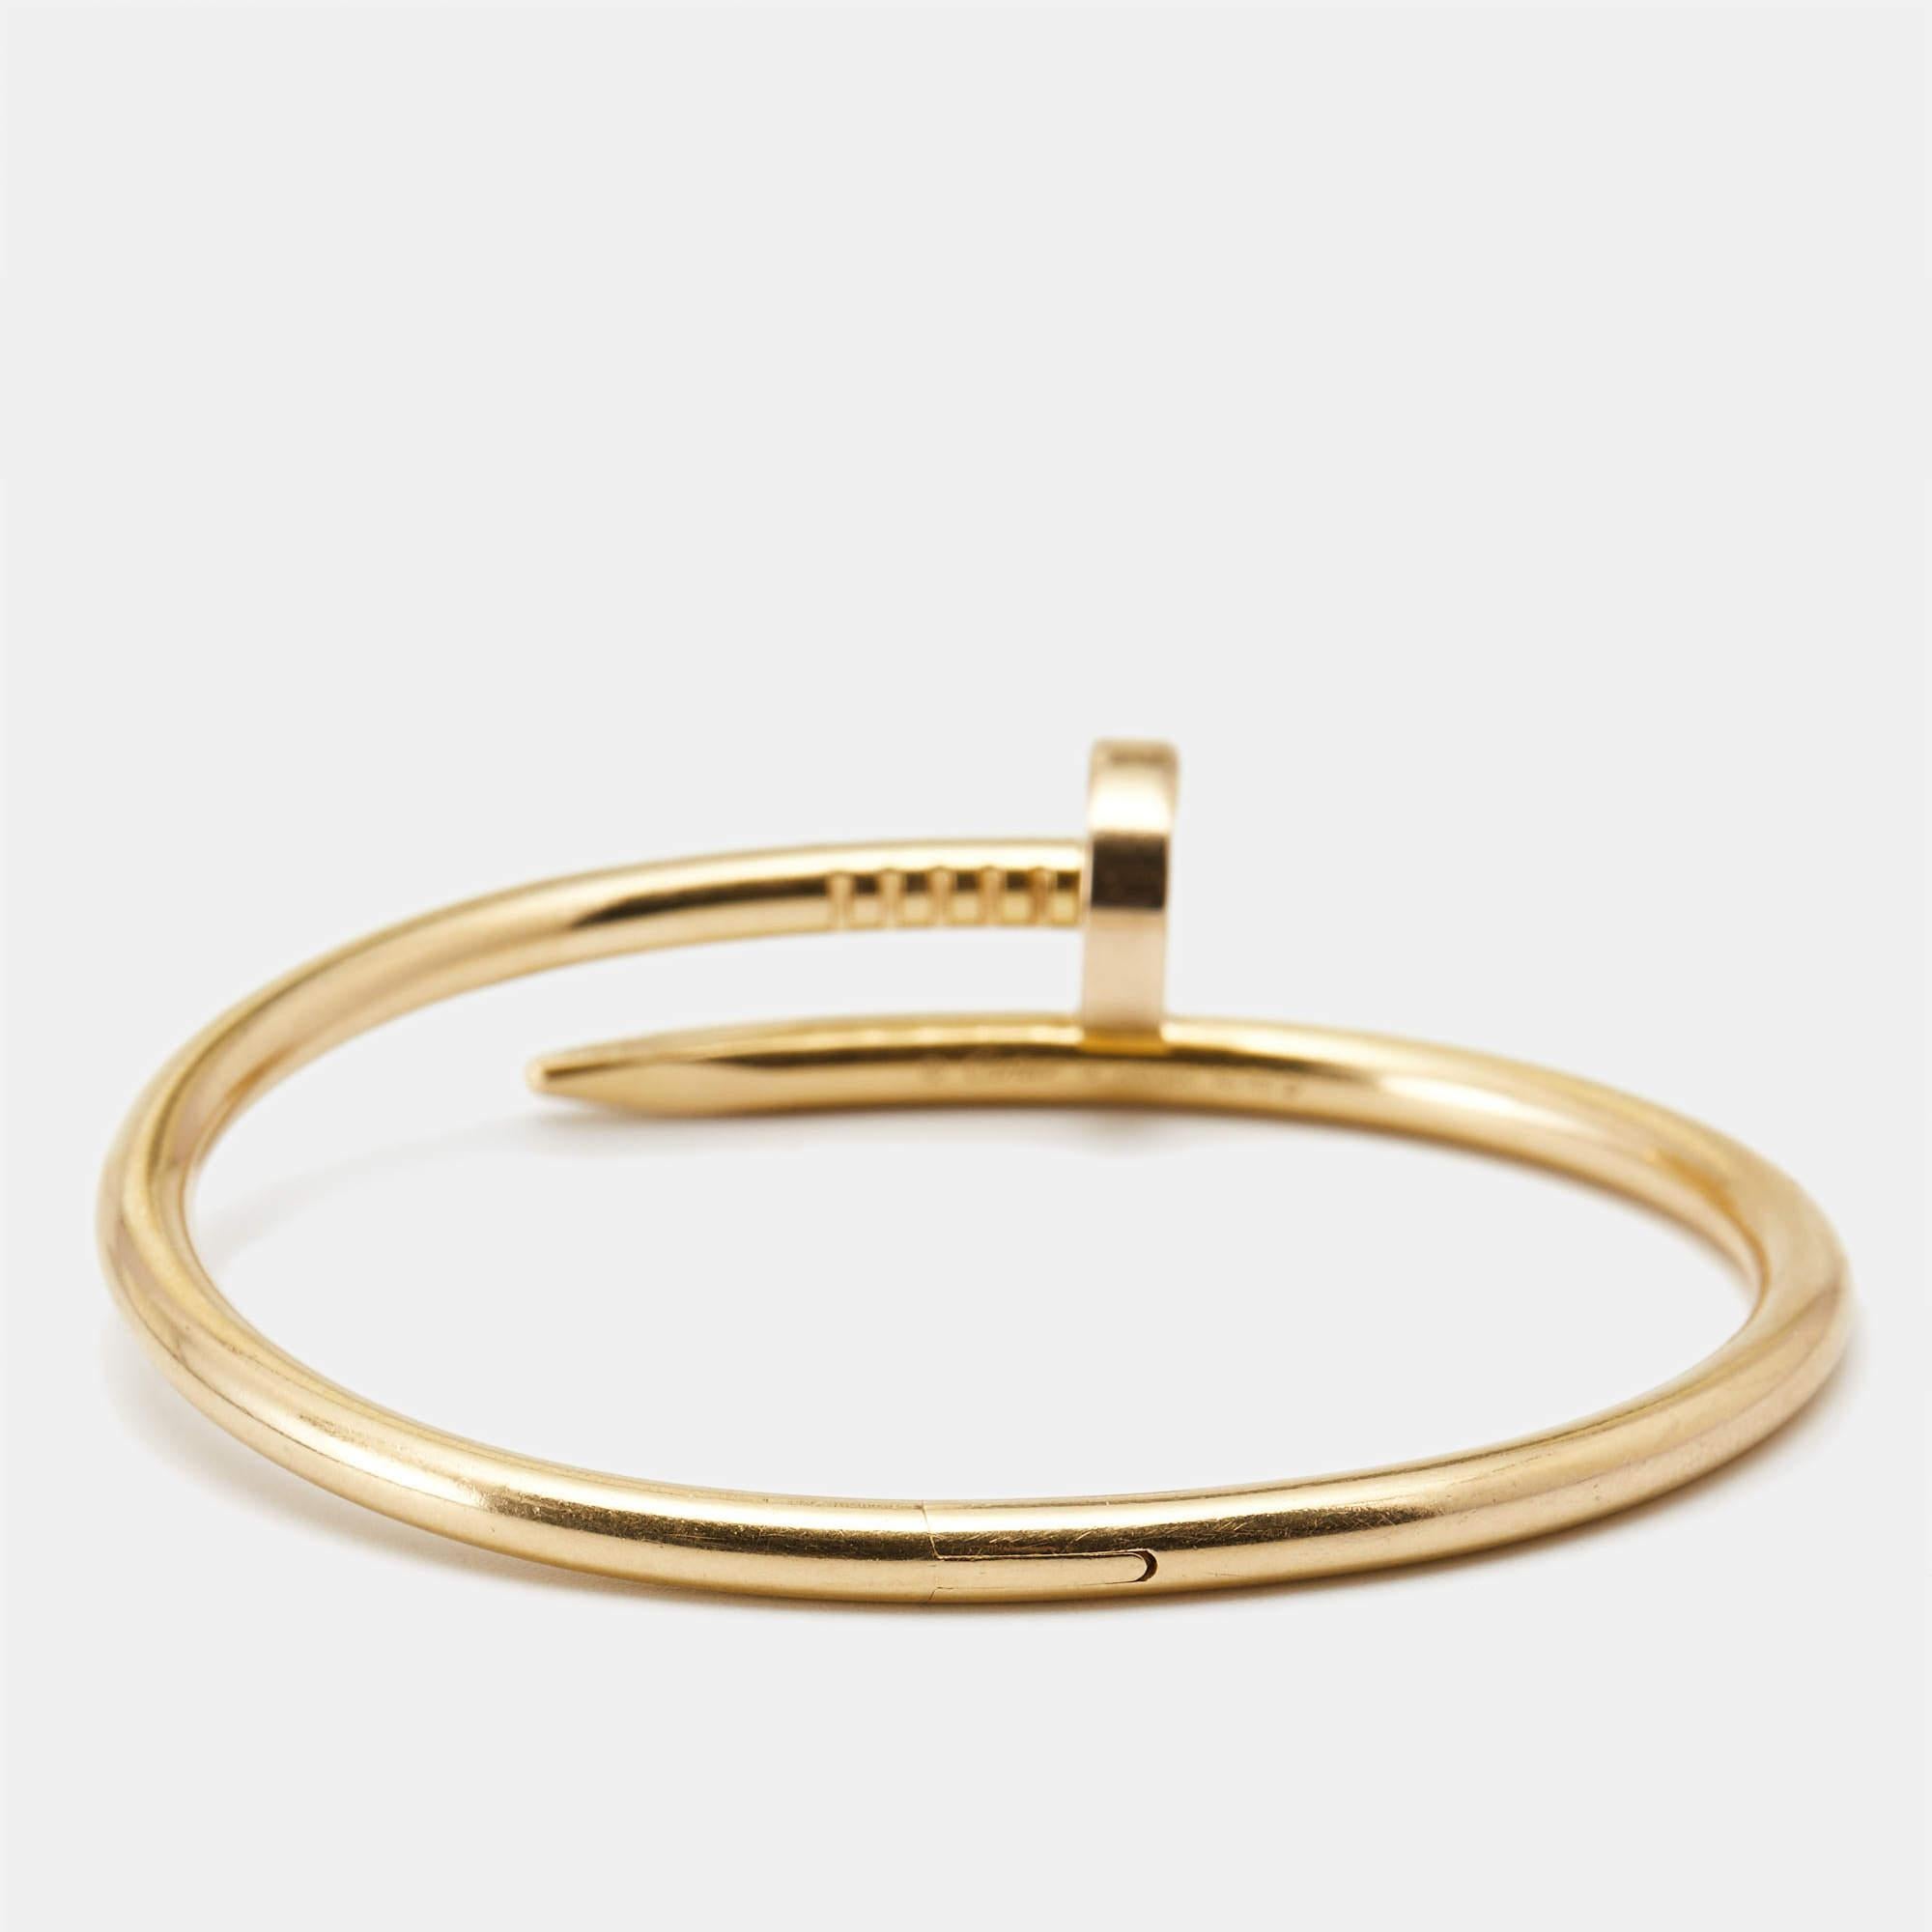 The Cartier Juste Un Clou bracelet is an iconic jewelry piece characterized by a nail-shaped design, crafted from luxurious 18k yellow gold. It blends modern elegance with timeless craftsmanship, creating a bold and sophisticated adornment for the